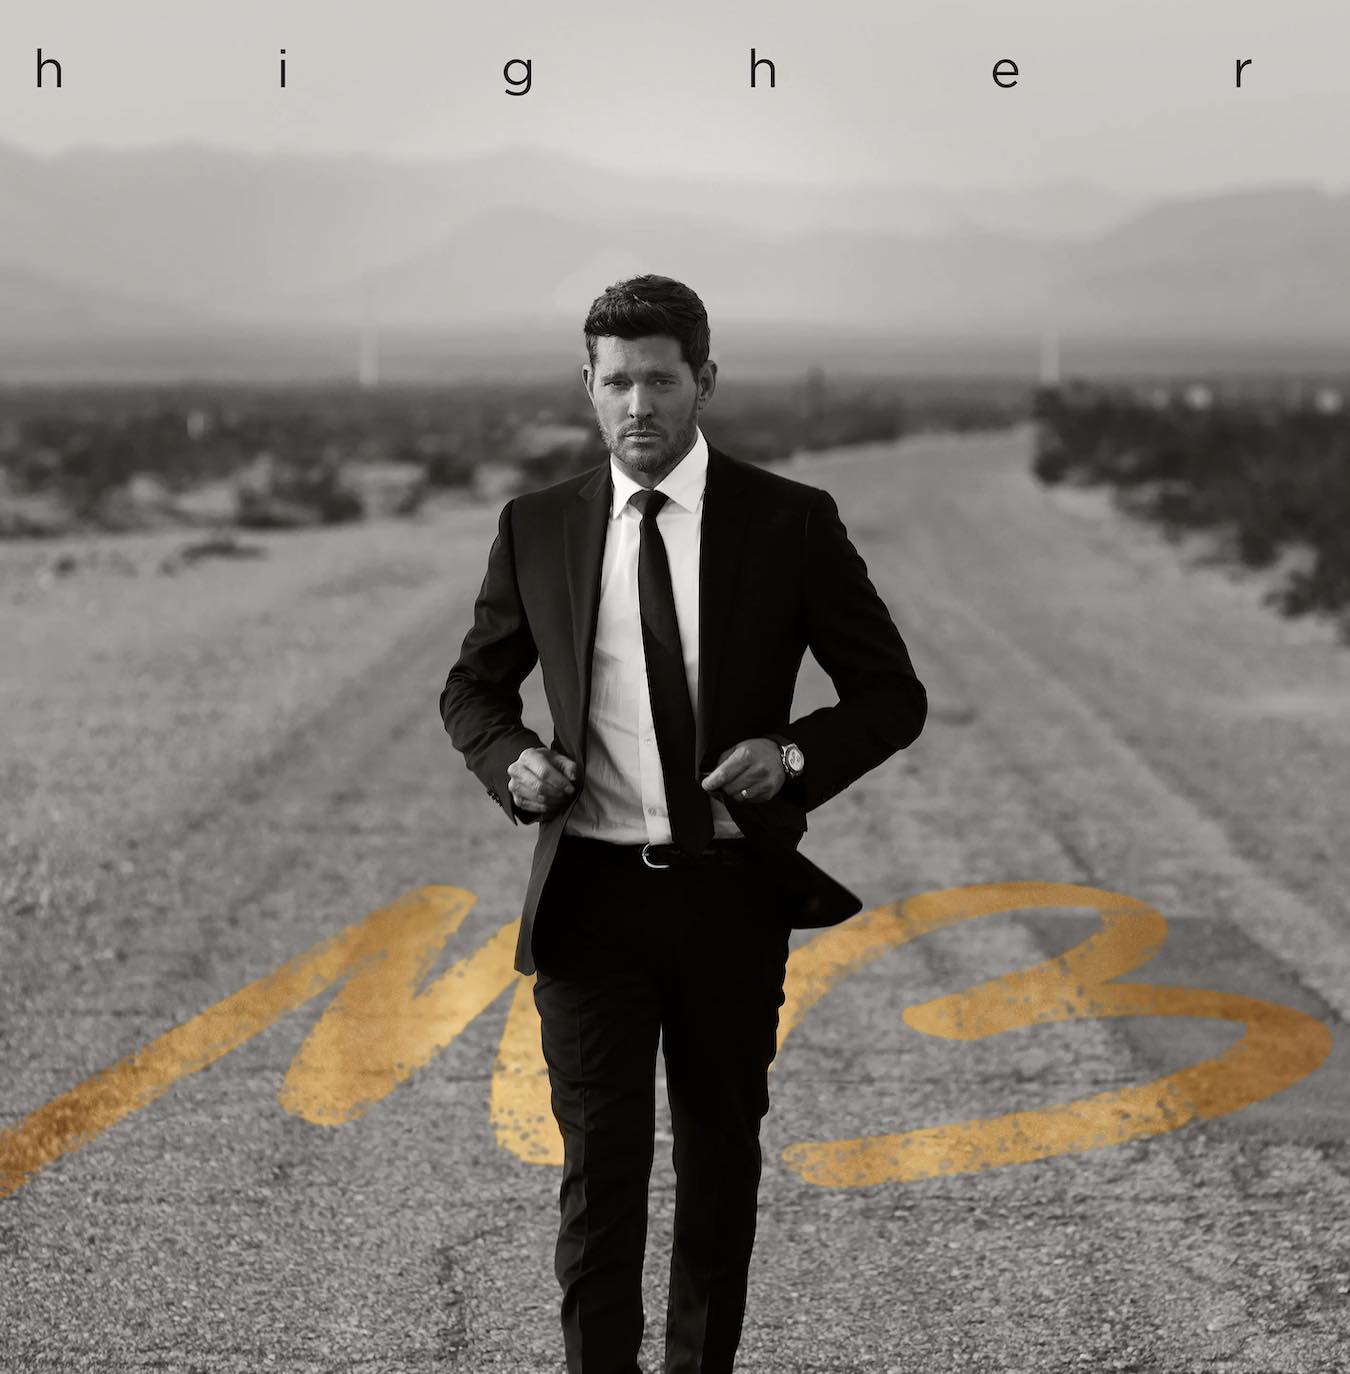 Michael Buble - Higher - I'll never not love you -